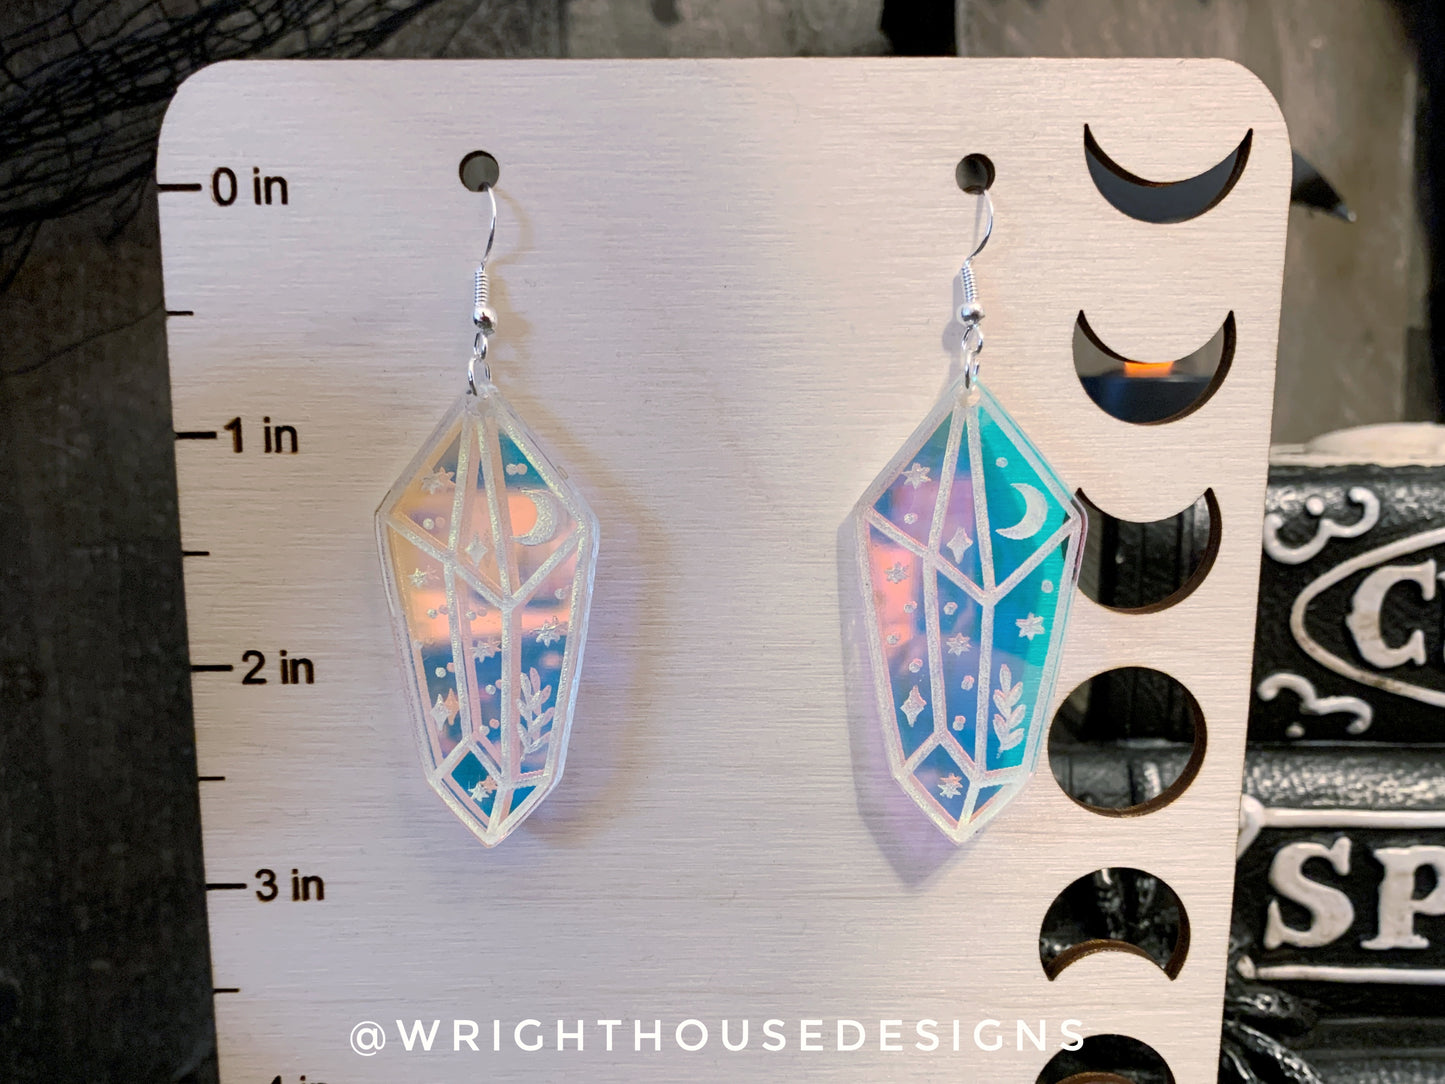 Celestial Crystals Two - Witchy Earrings - Engraved Iridescent Acrylic Handmade Jewelry